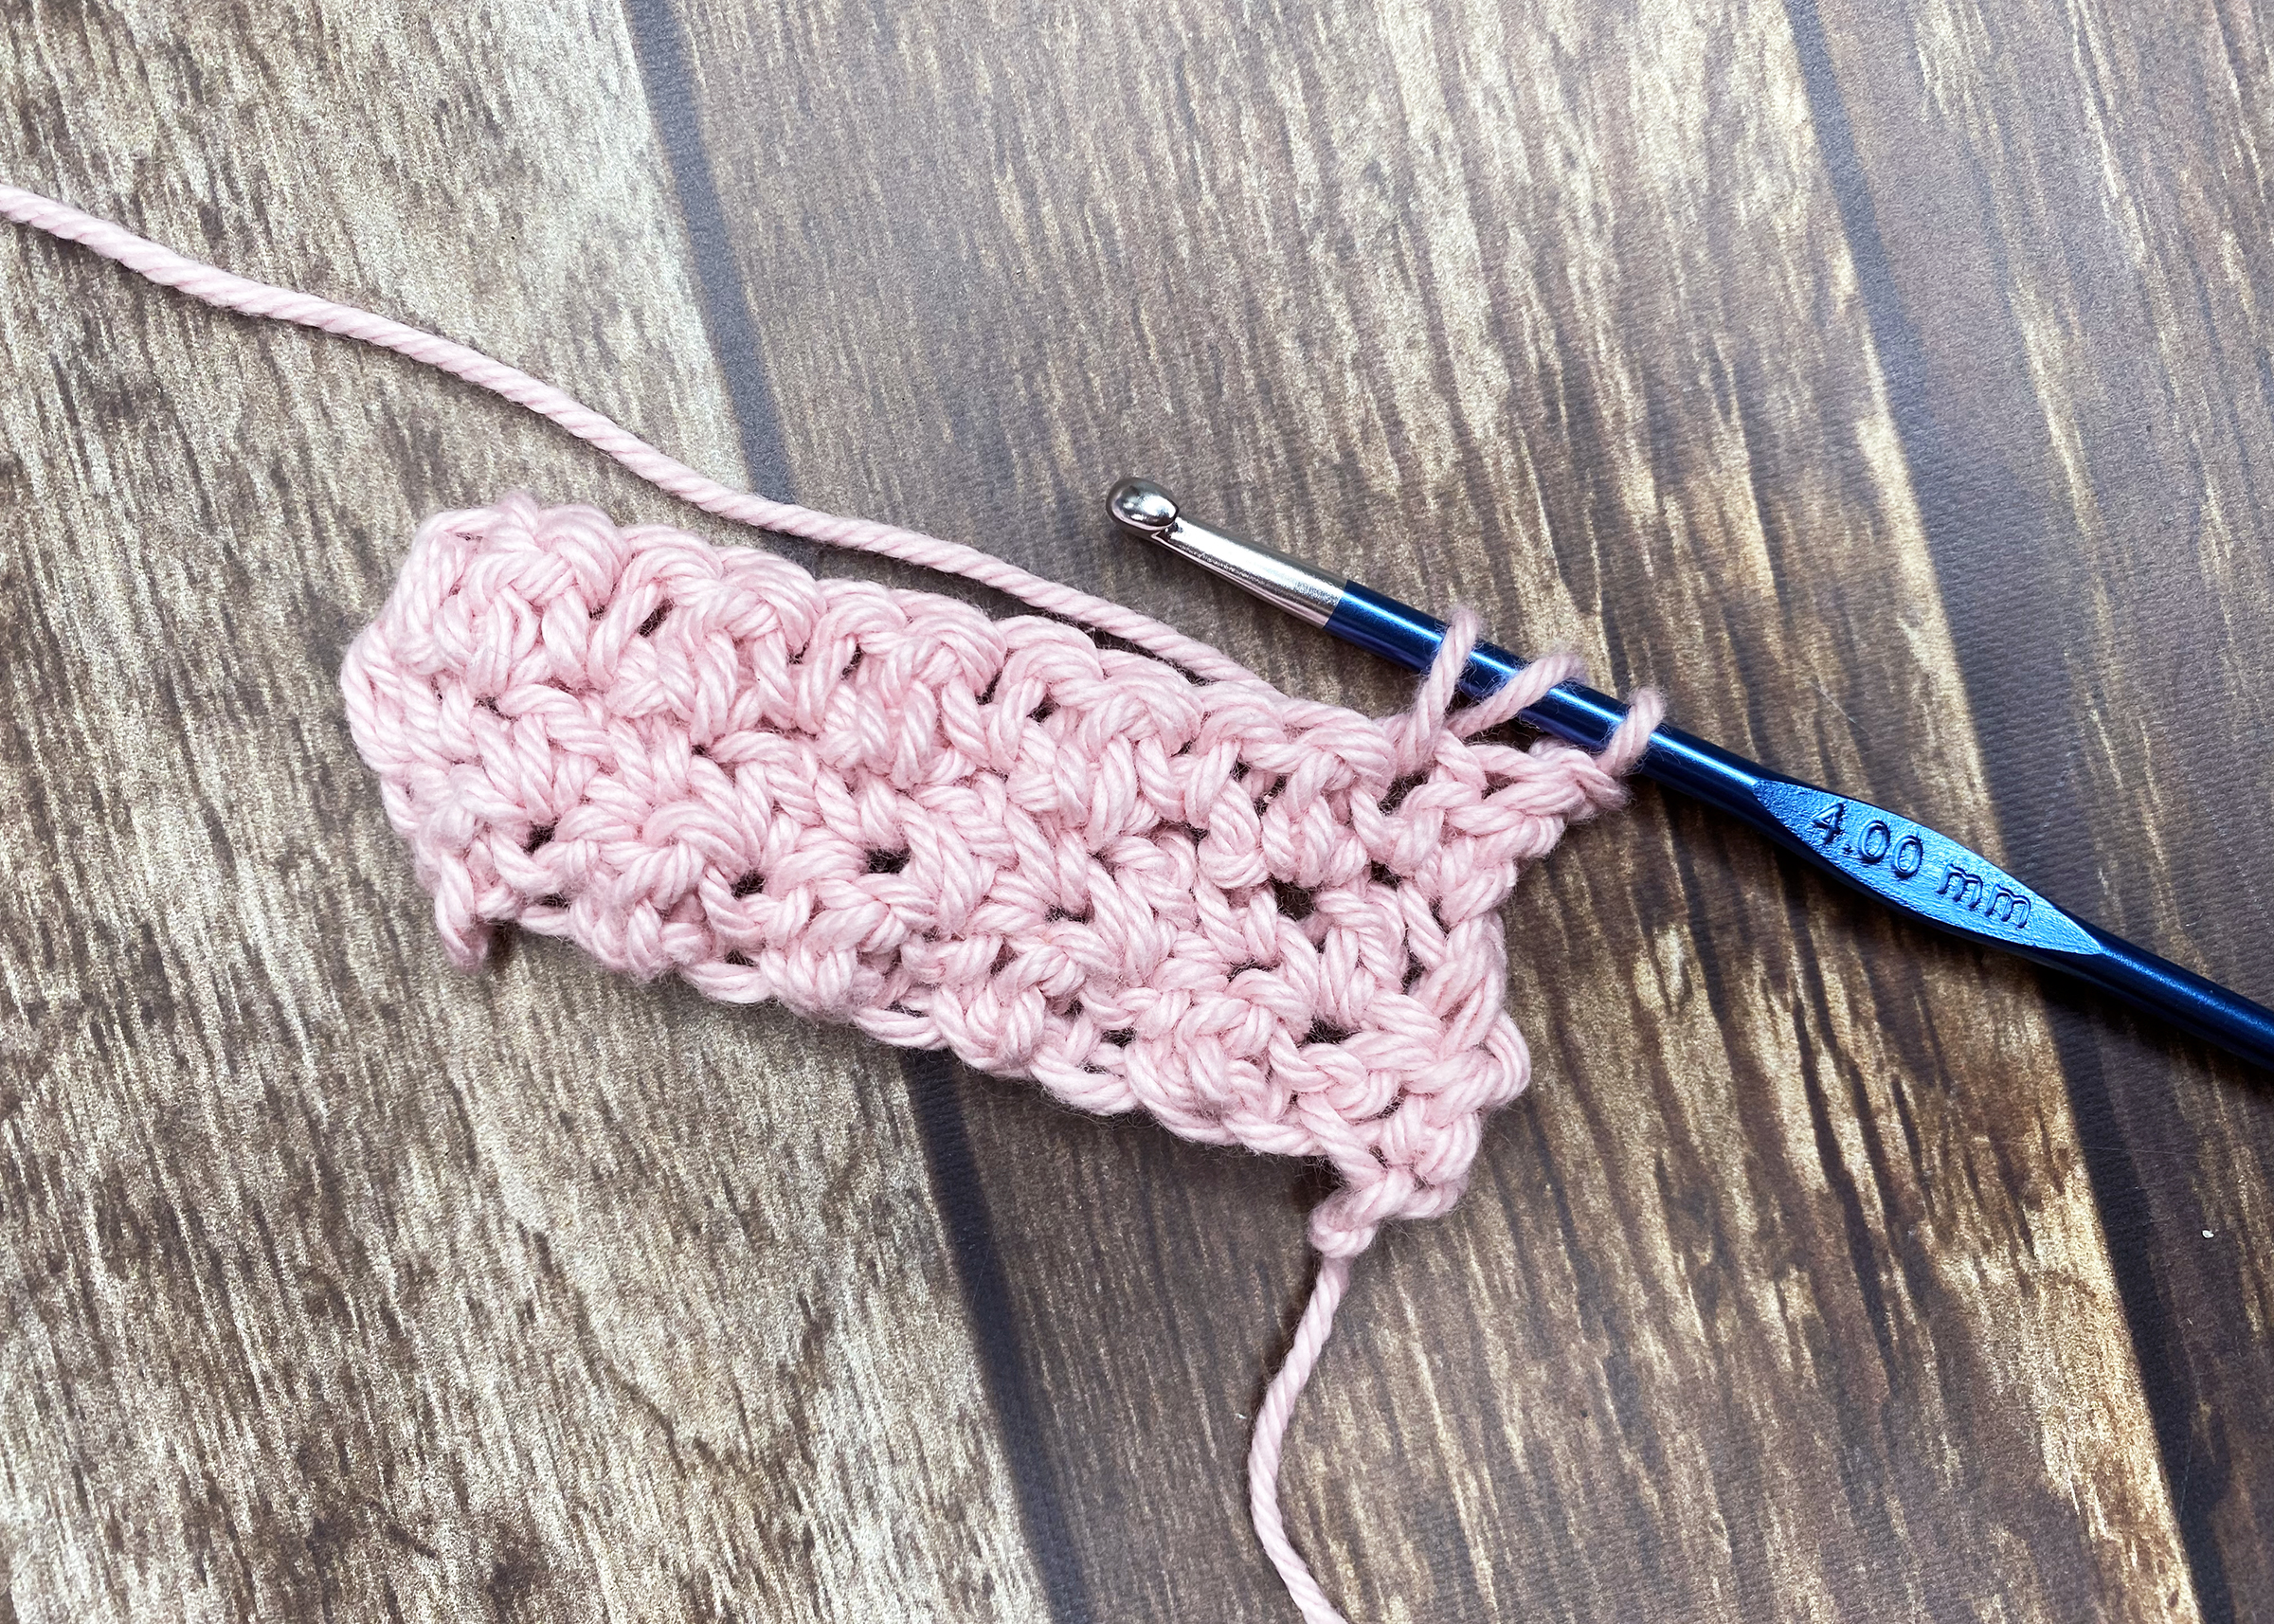 a close up of a crochet hook and a partly crocheted project using pink yarn